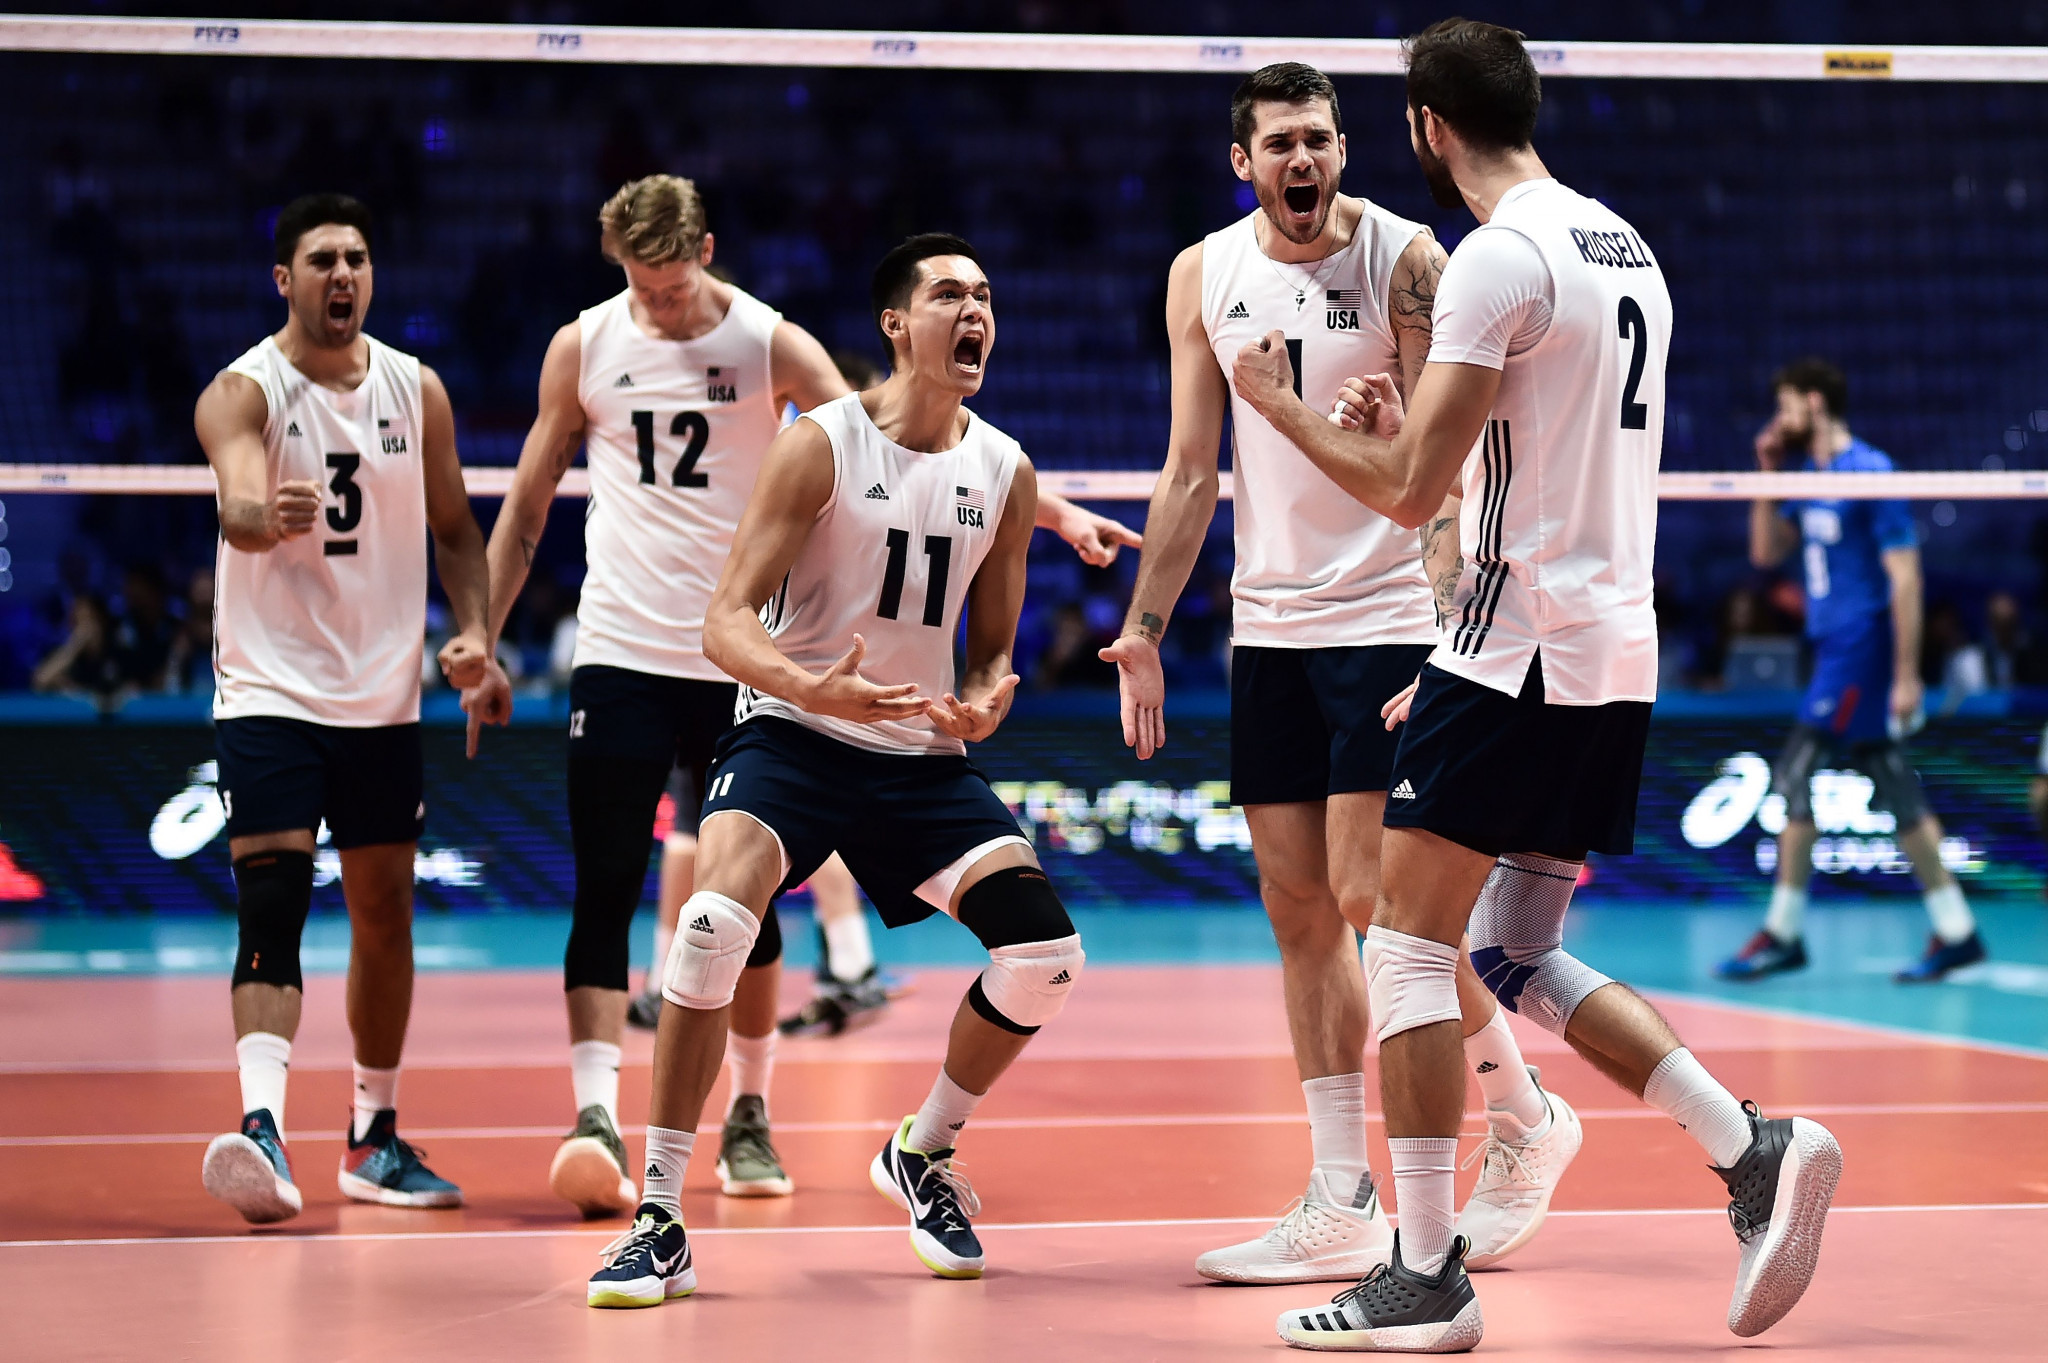 The men's indoor volleyball team have been nominated for team of the month for winning America's first FIVB World Championship medal in 24 years ©Getty Images